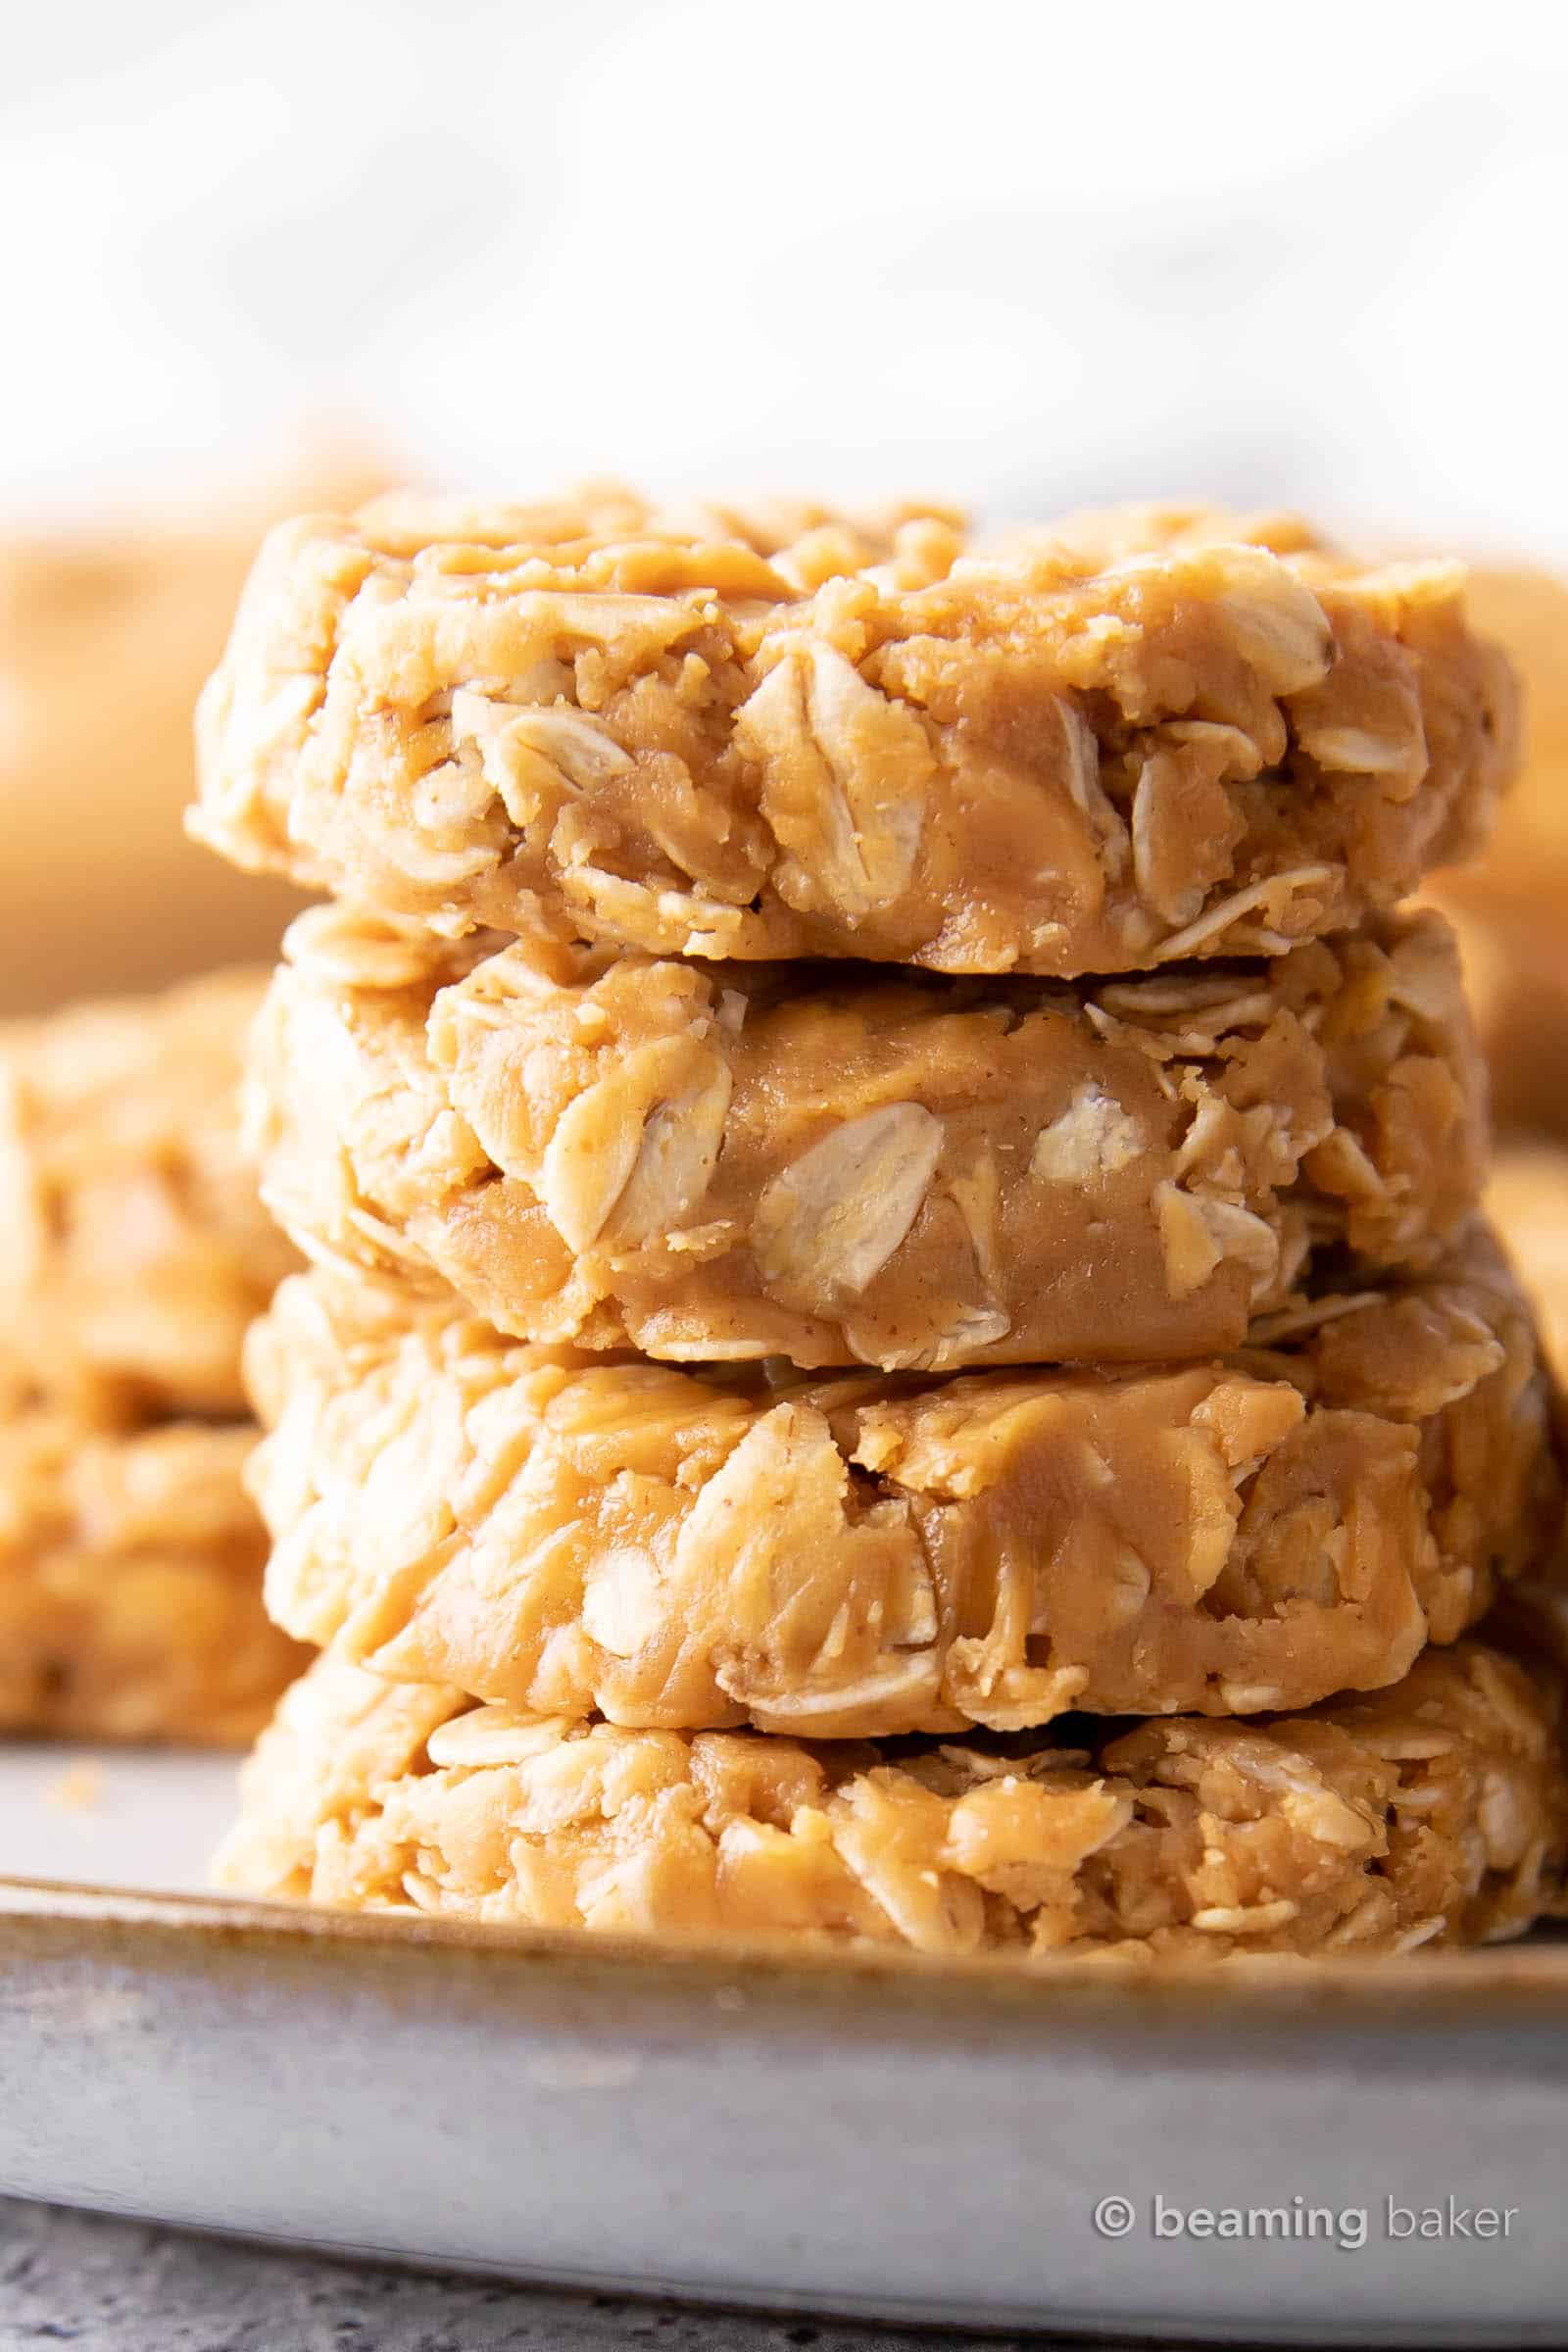 Easy Peanut Butter No Bake Cookies: this 3 ingredient peanut butter no bake cookies recipe is so easy to make! Sweet, chewy and satisfying no bake peanut butter oatmeal cookies. #NoBake #Cookies #PeanutButter #Oatmeal | Recipe at BeamingBaker.com